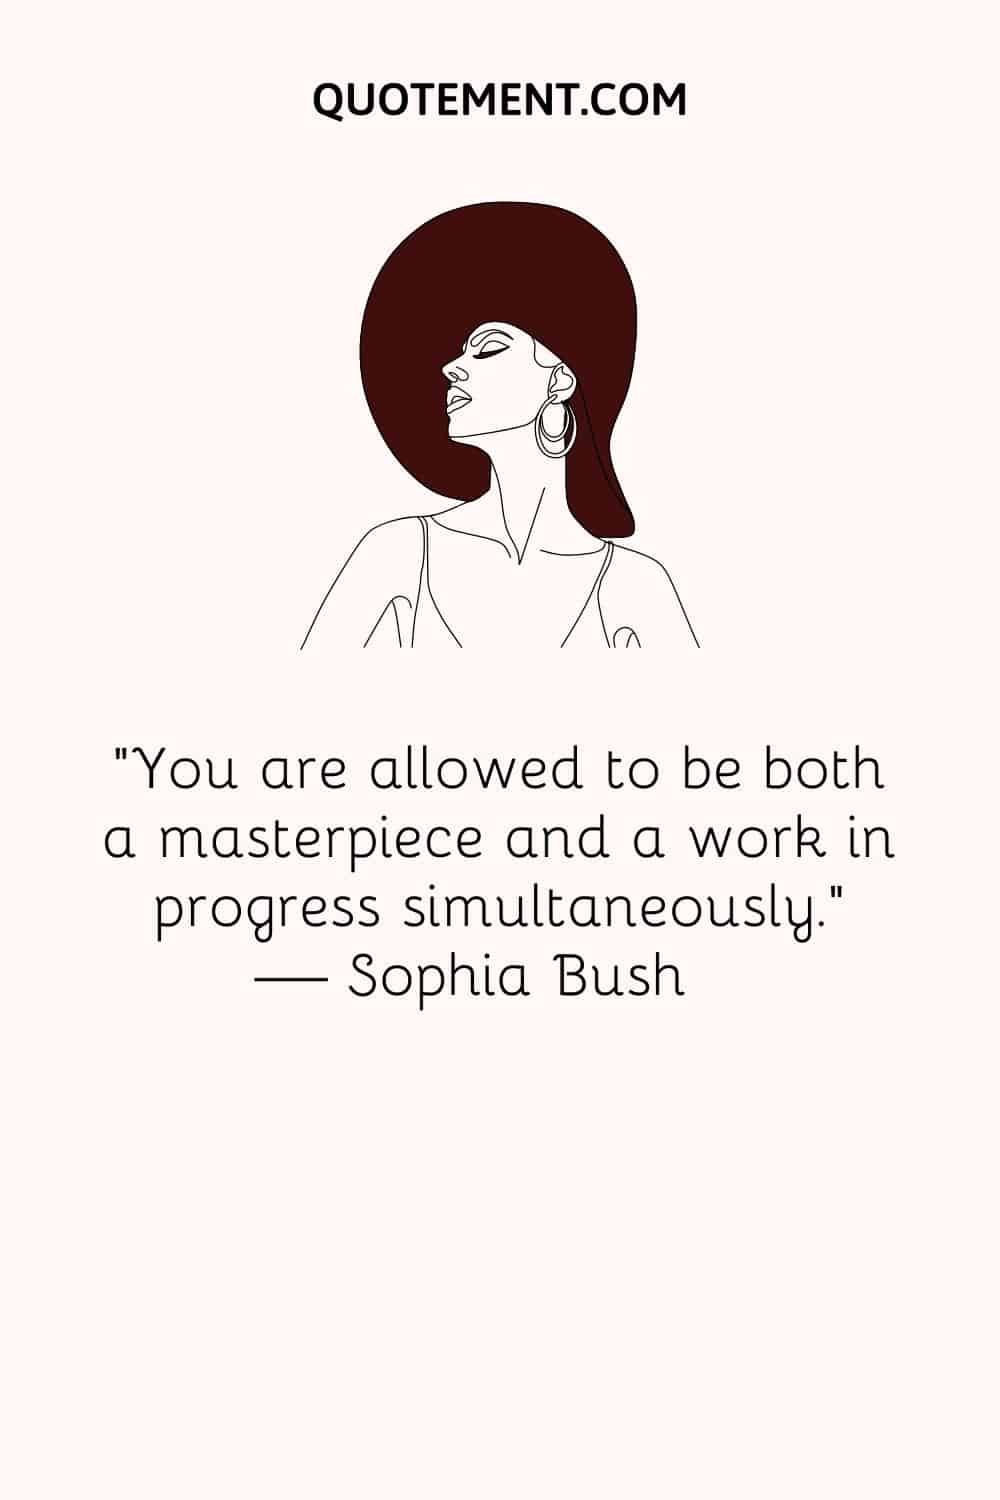 “You are allowed to be both a masterpiece and a work in progress simultaneously.” — Sophia Bush